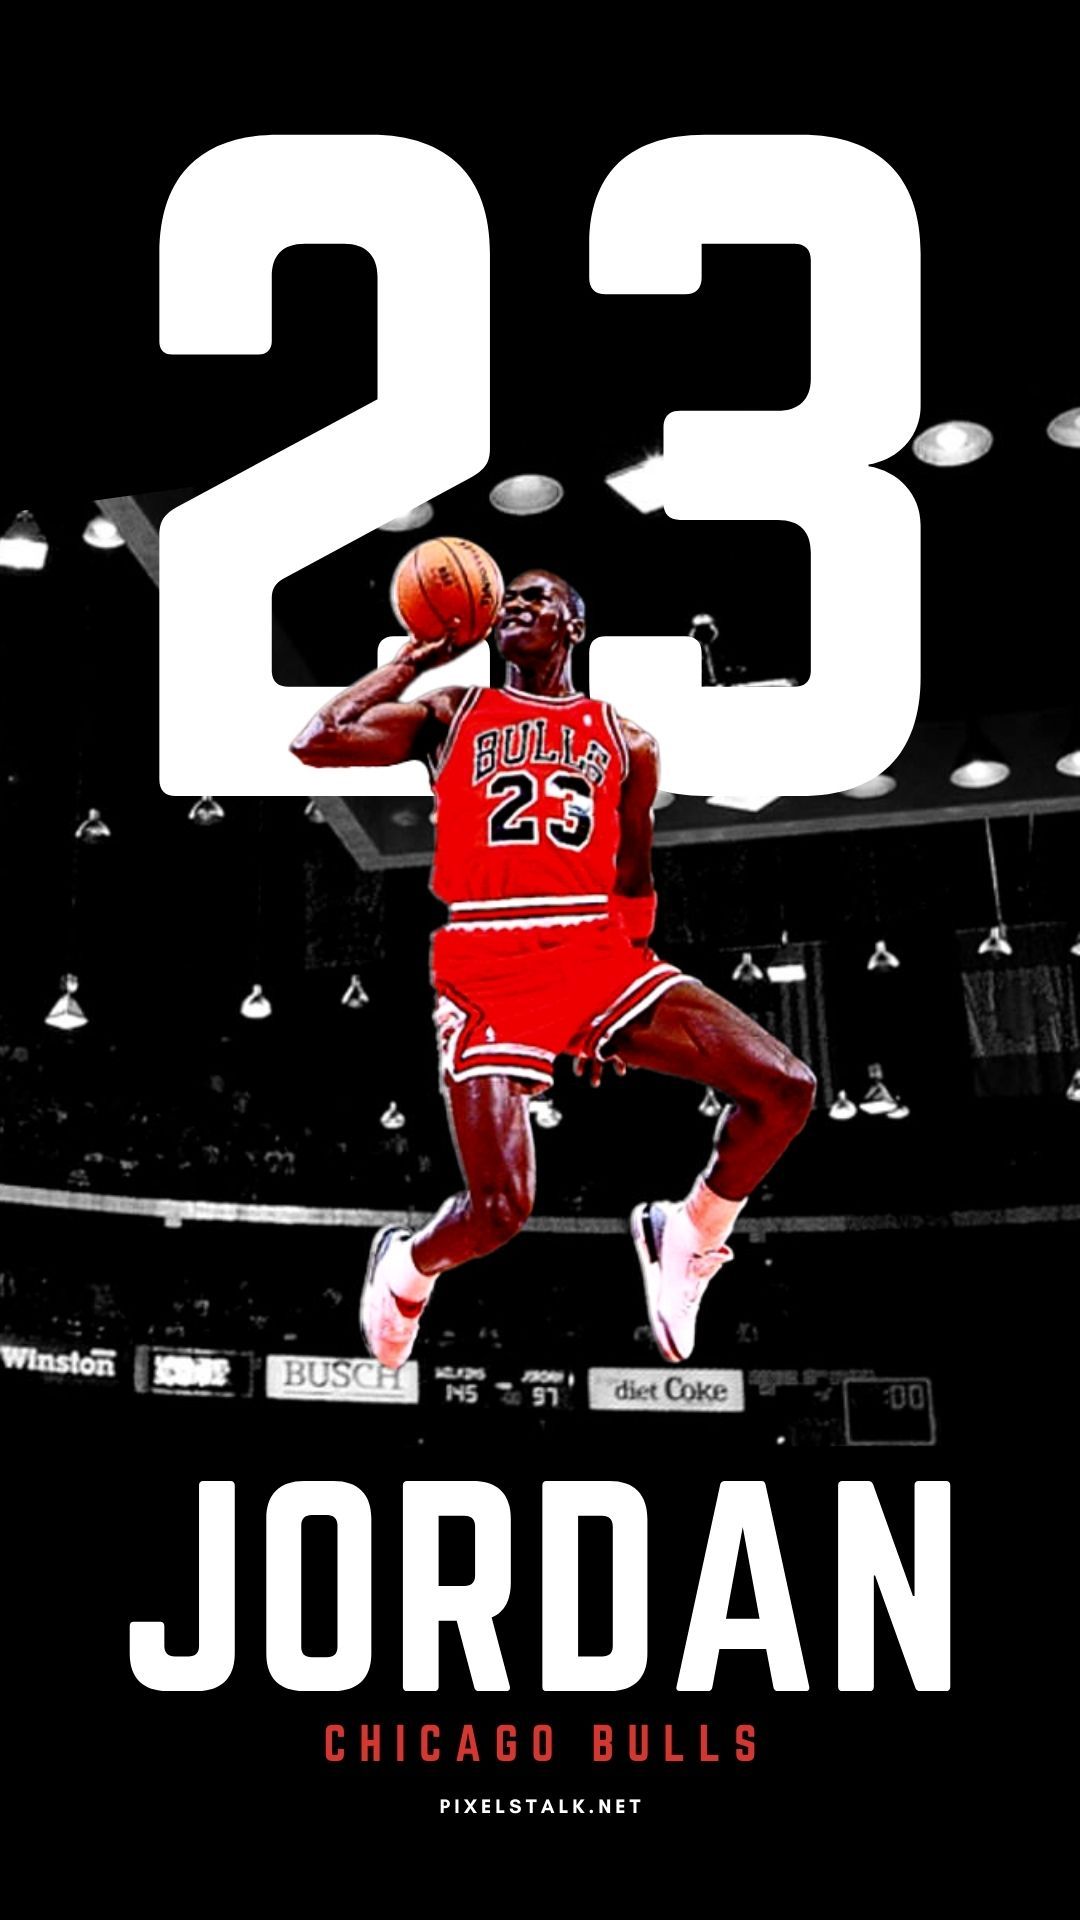 Jordan 23 wallpaper for iPhone and Android devices. Get the full size images at Pixelstalk.net - Michael Jordan